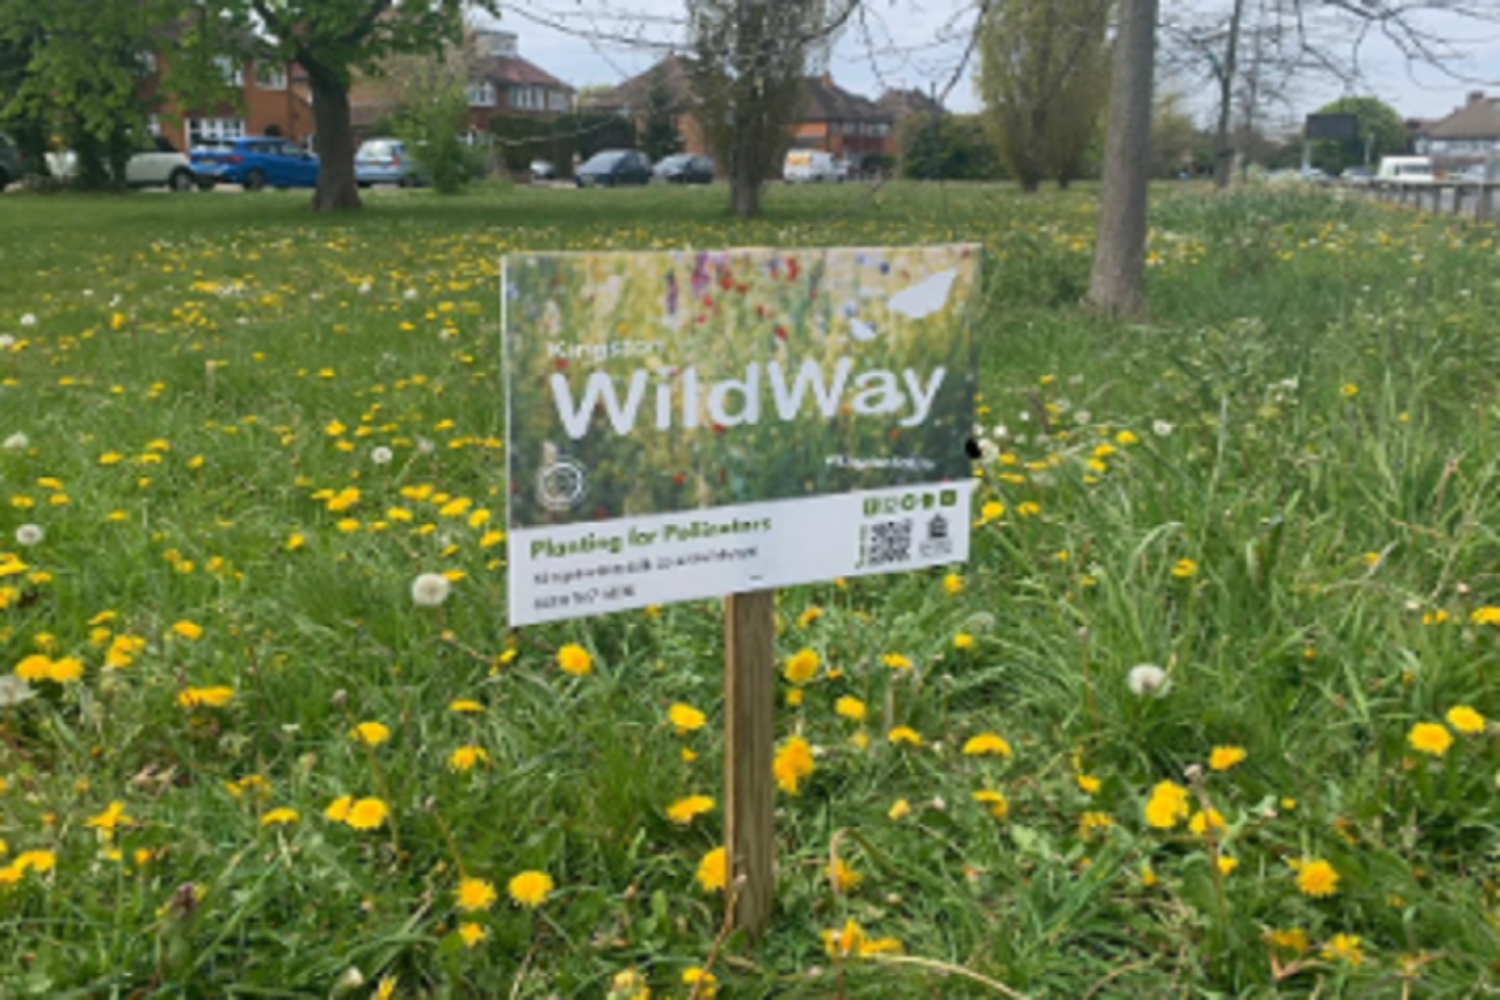 Kingston’s WildWay project sign in a field with yellow flowers